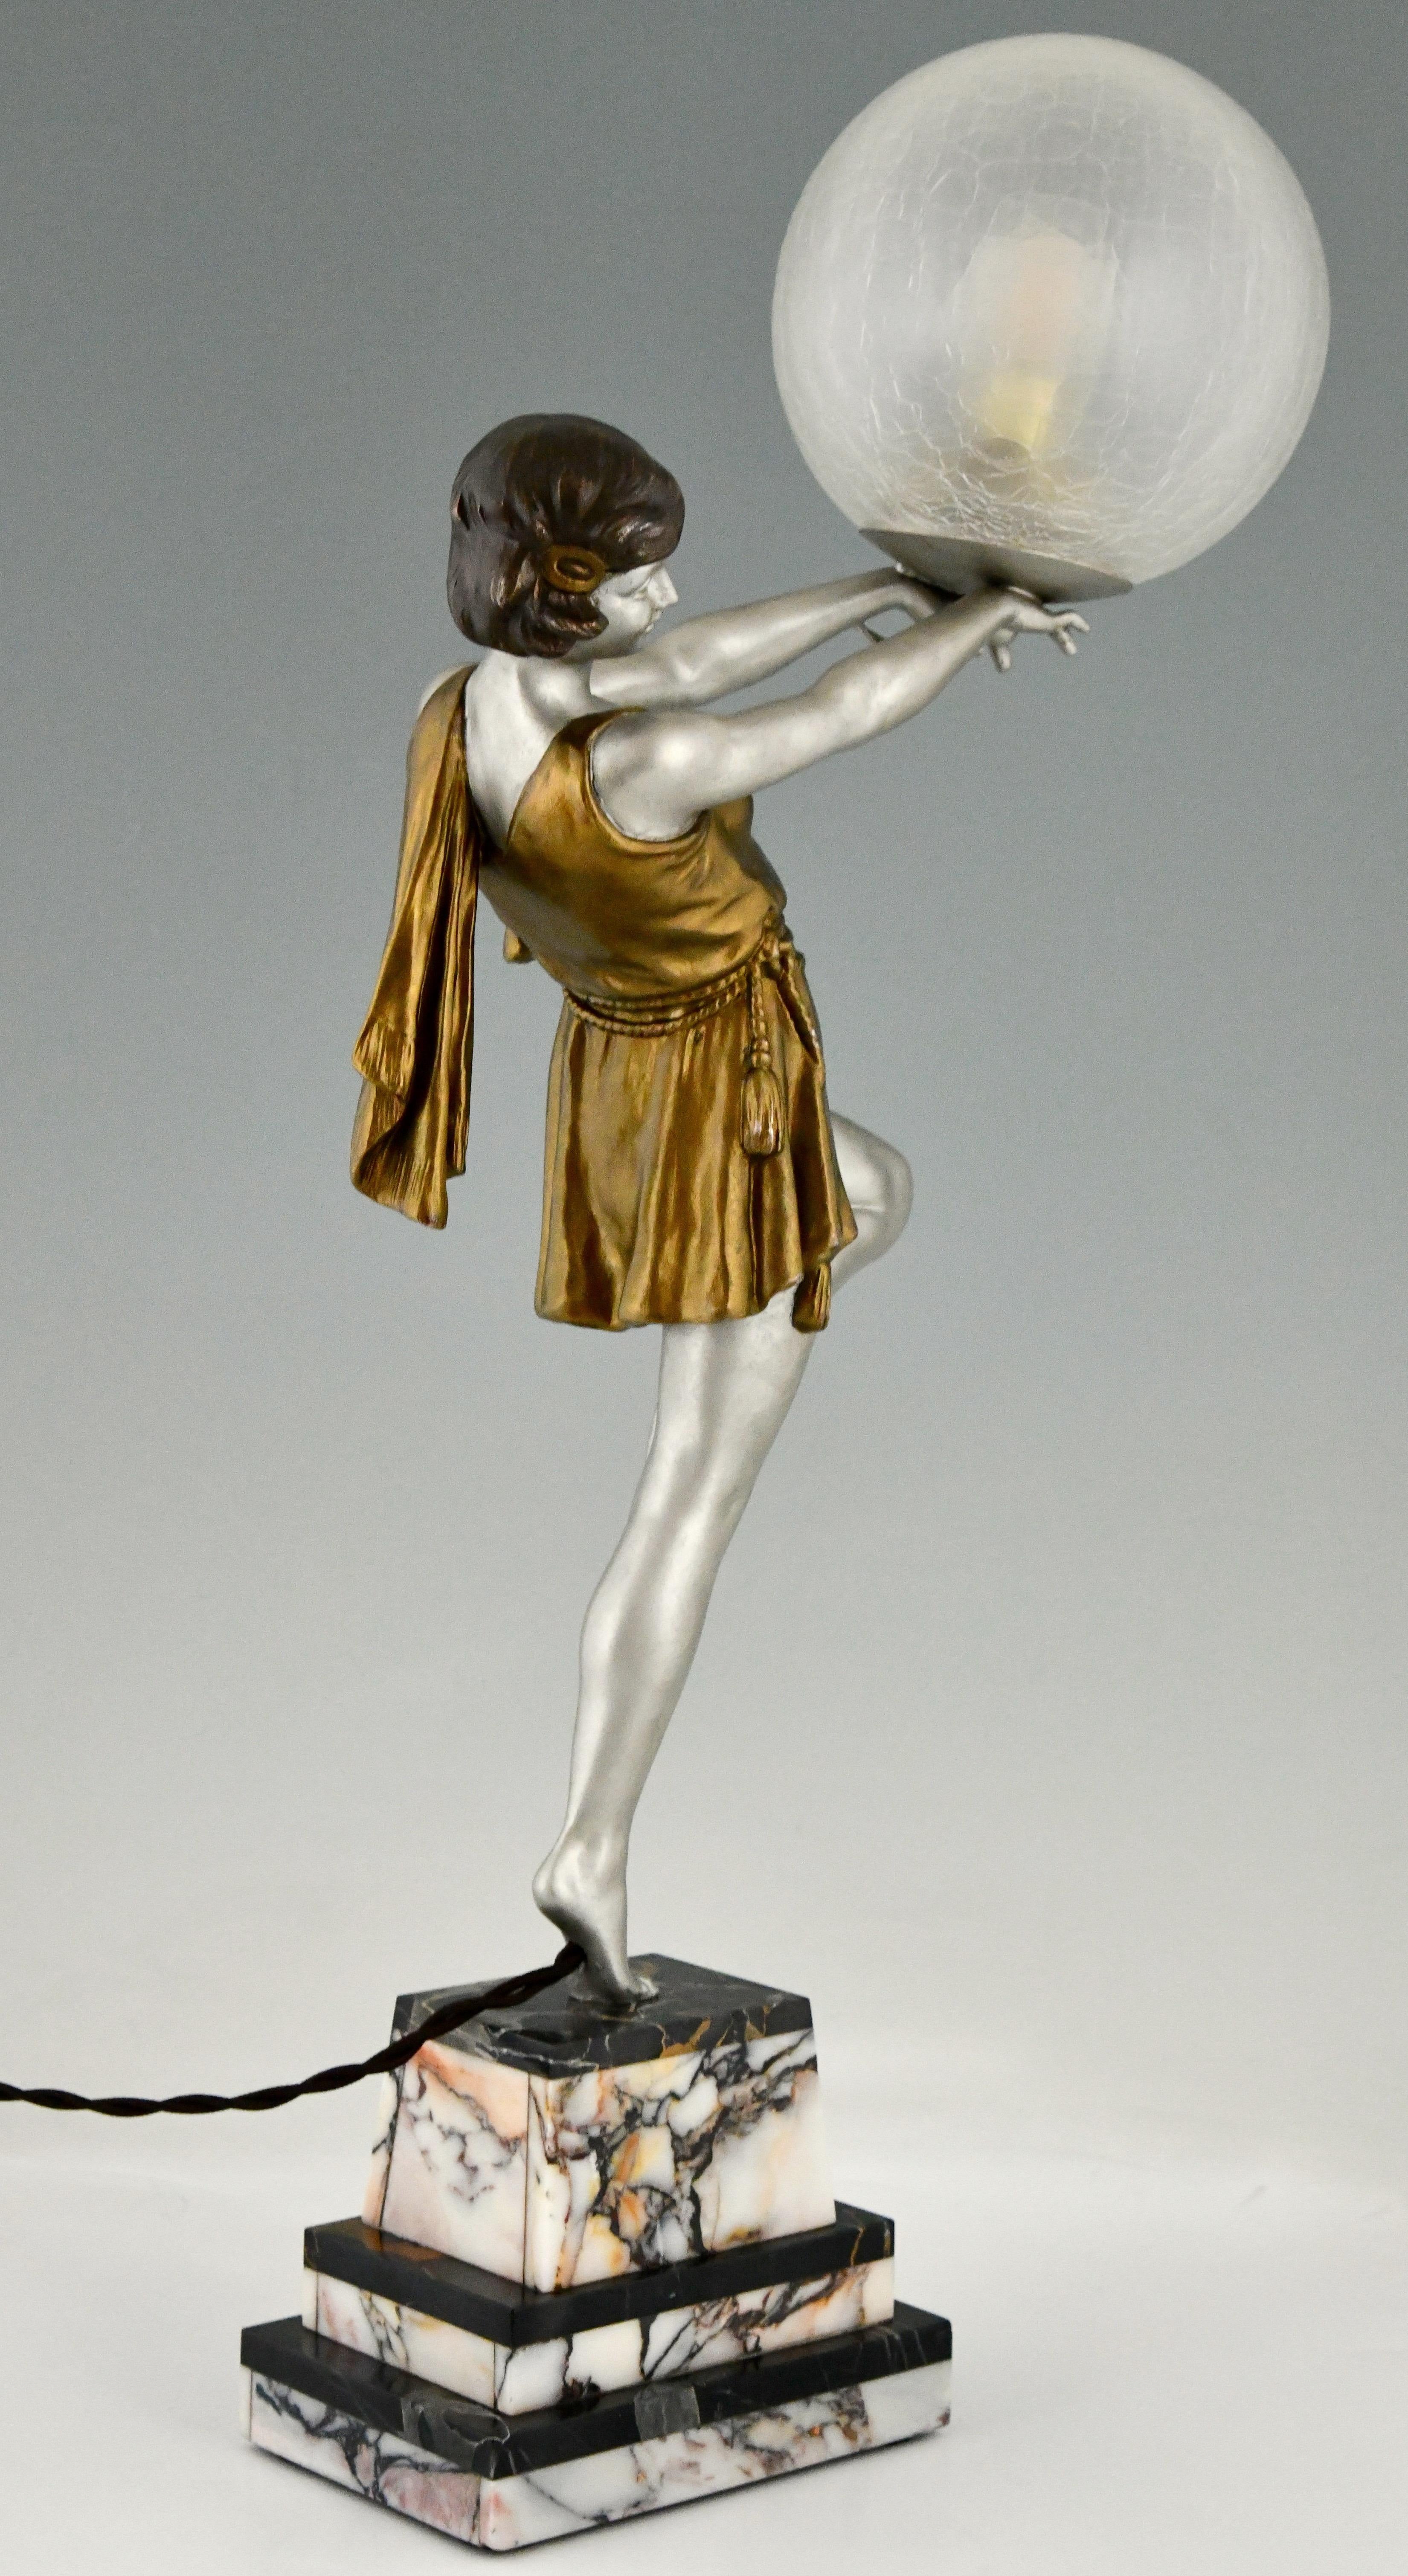 Metal Art Deco Lamp Lady Holding a Ball by Emile Carlier, France, 1930